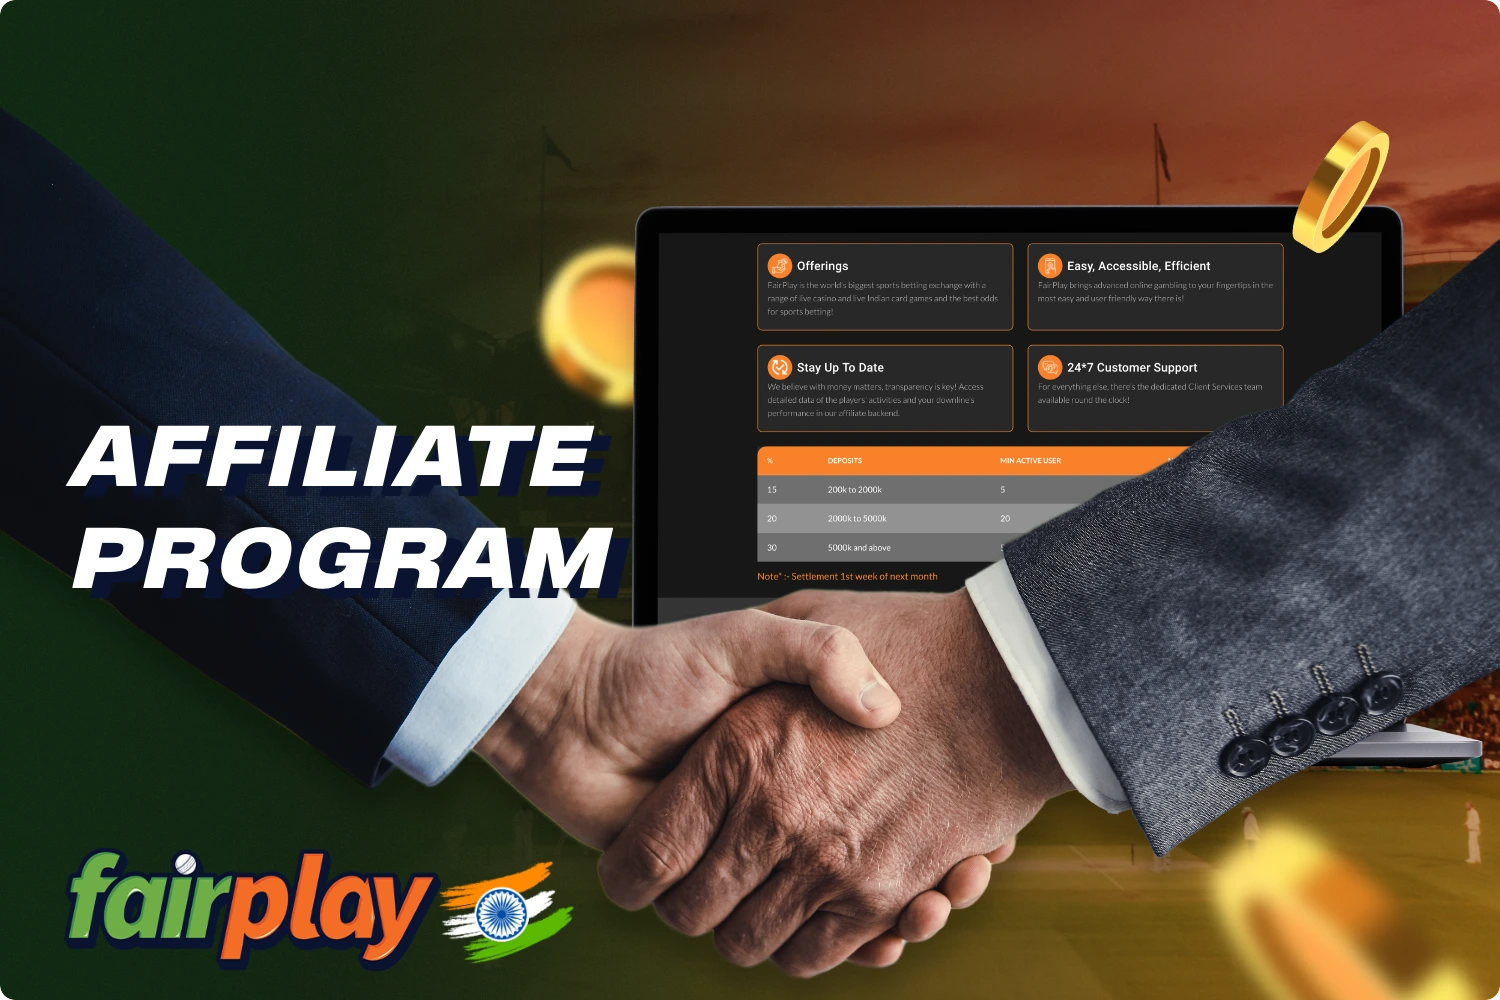 Fairplay affiliate program allows you to earn simply by attracting new customers